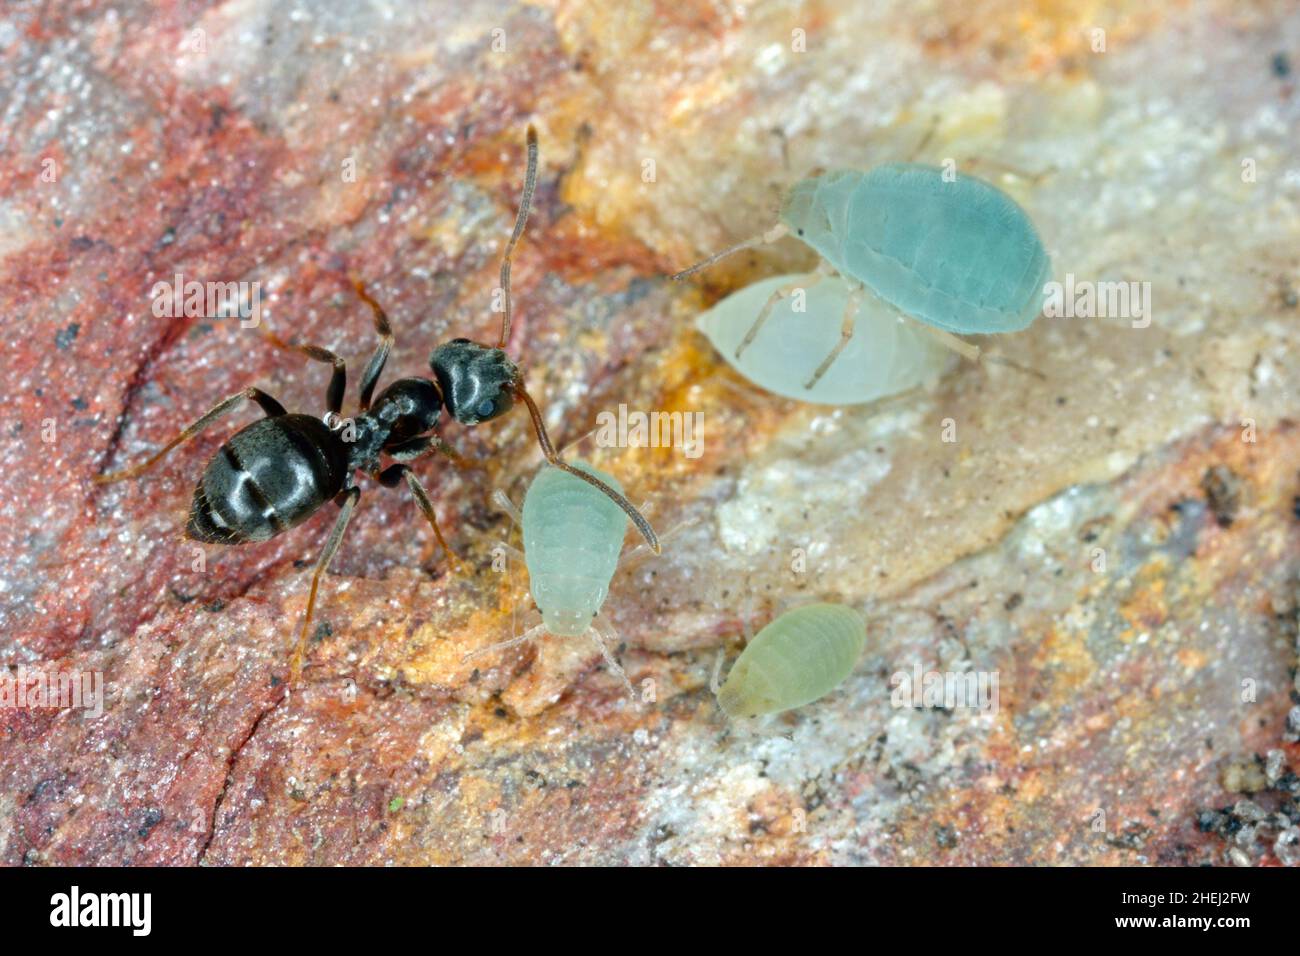 Underground aphids with ants. High magnification Stock Photo